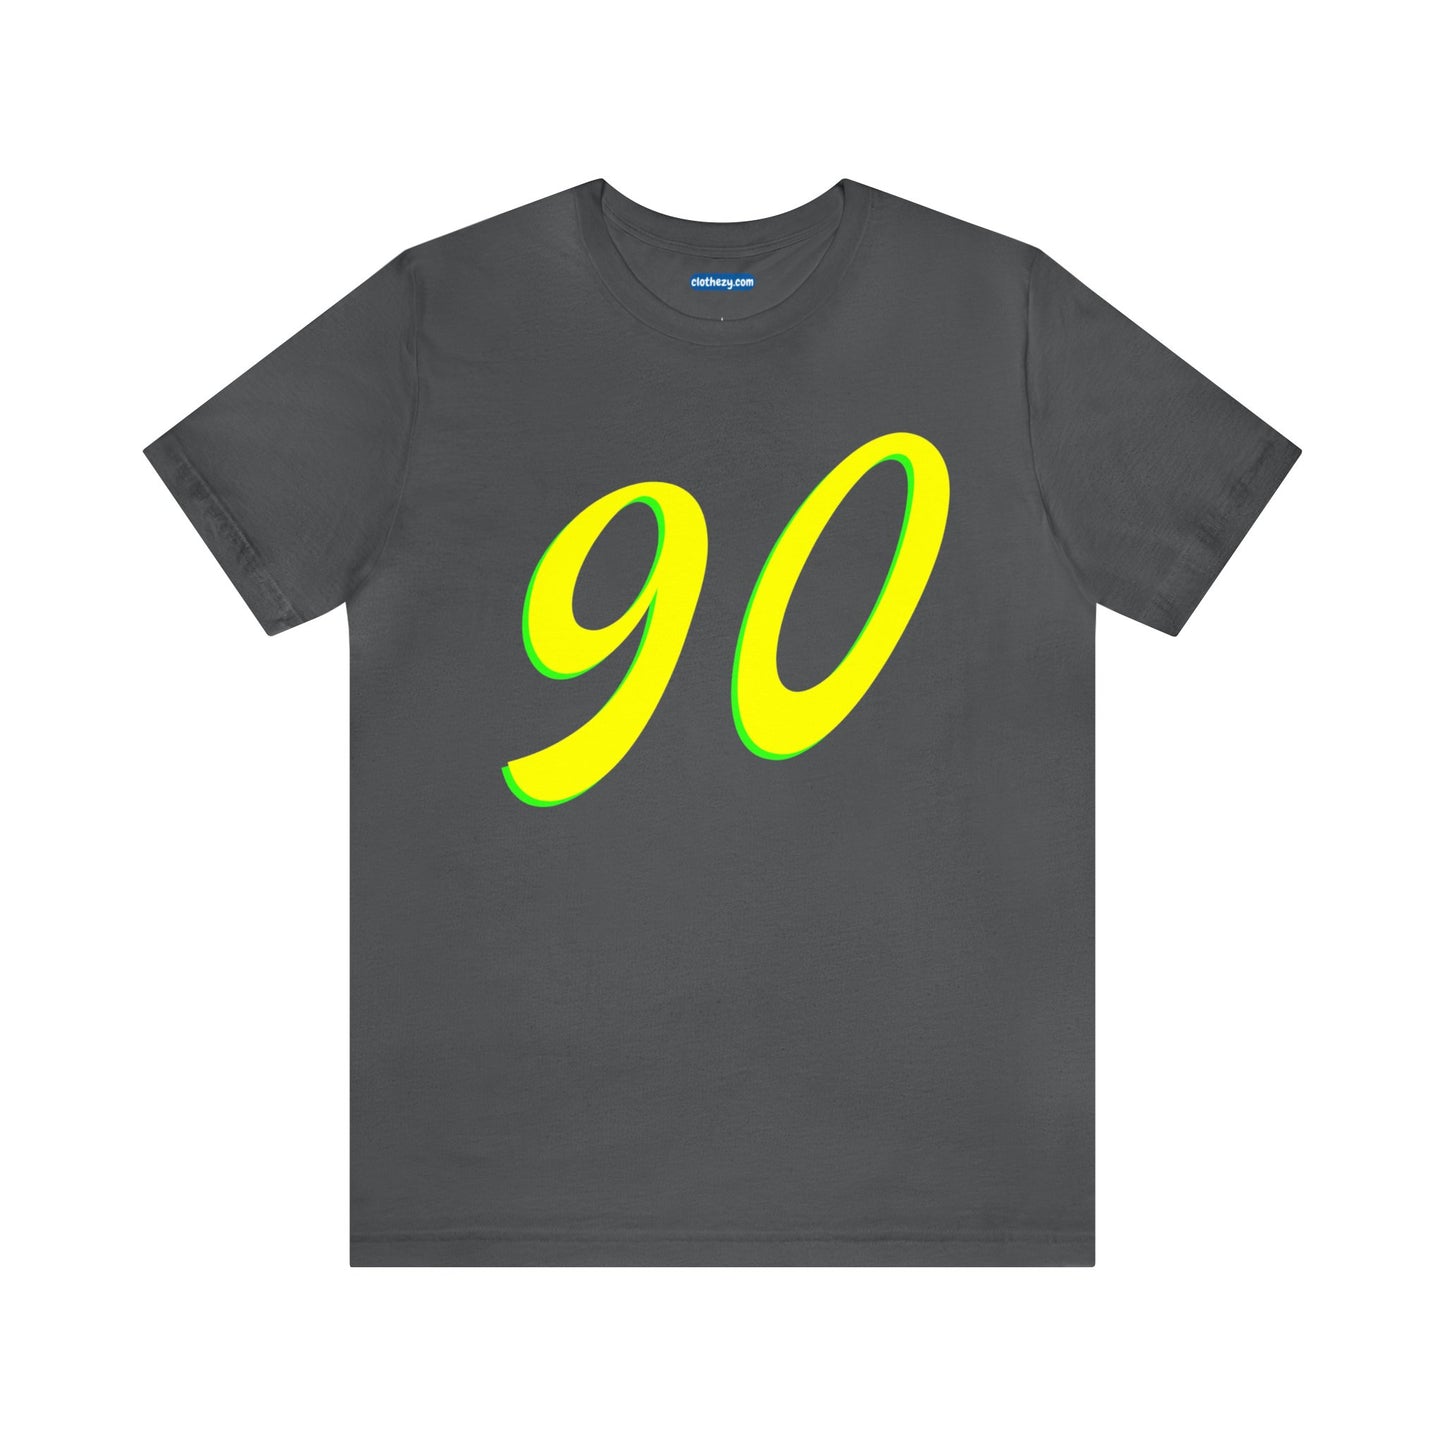 Number 90 Design - Soft Cotton Tee for birthdays and celebrations, Gift for friends and family, Multiple Options by clothezy.com in Black Size Small - Buy Now